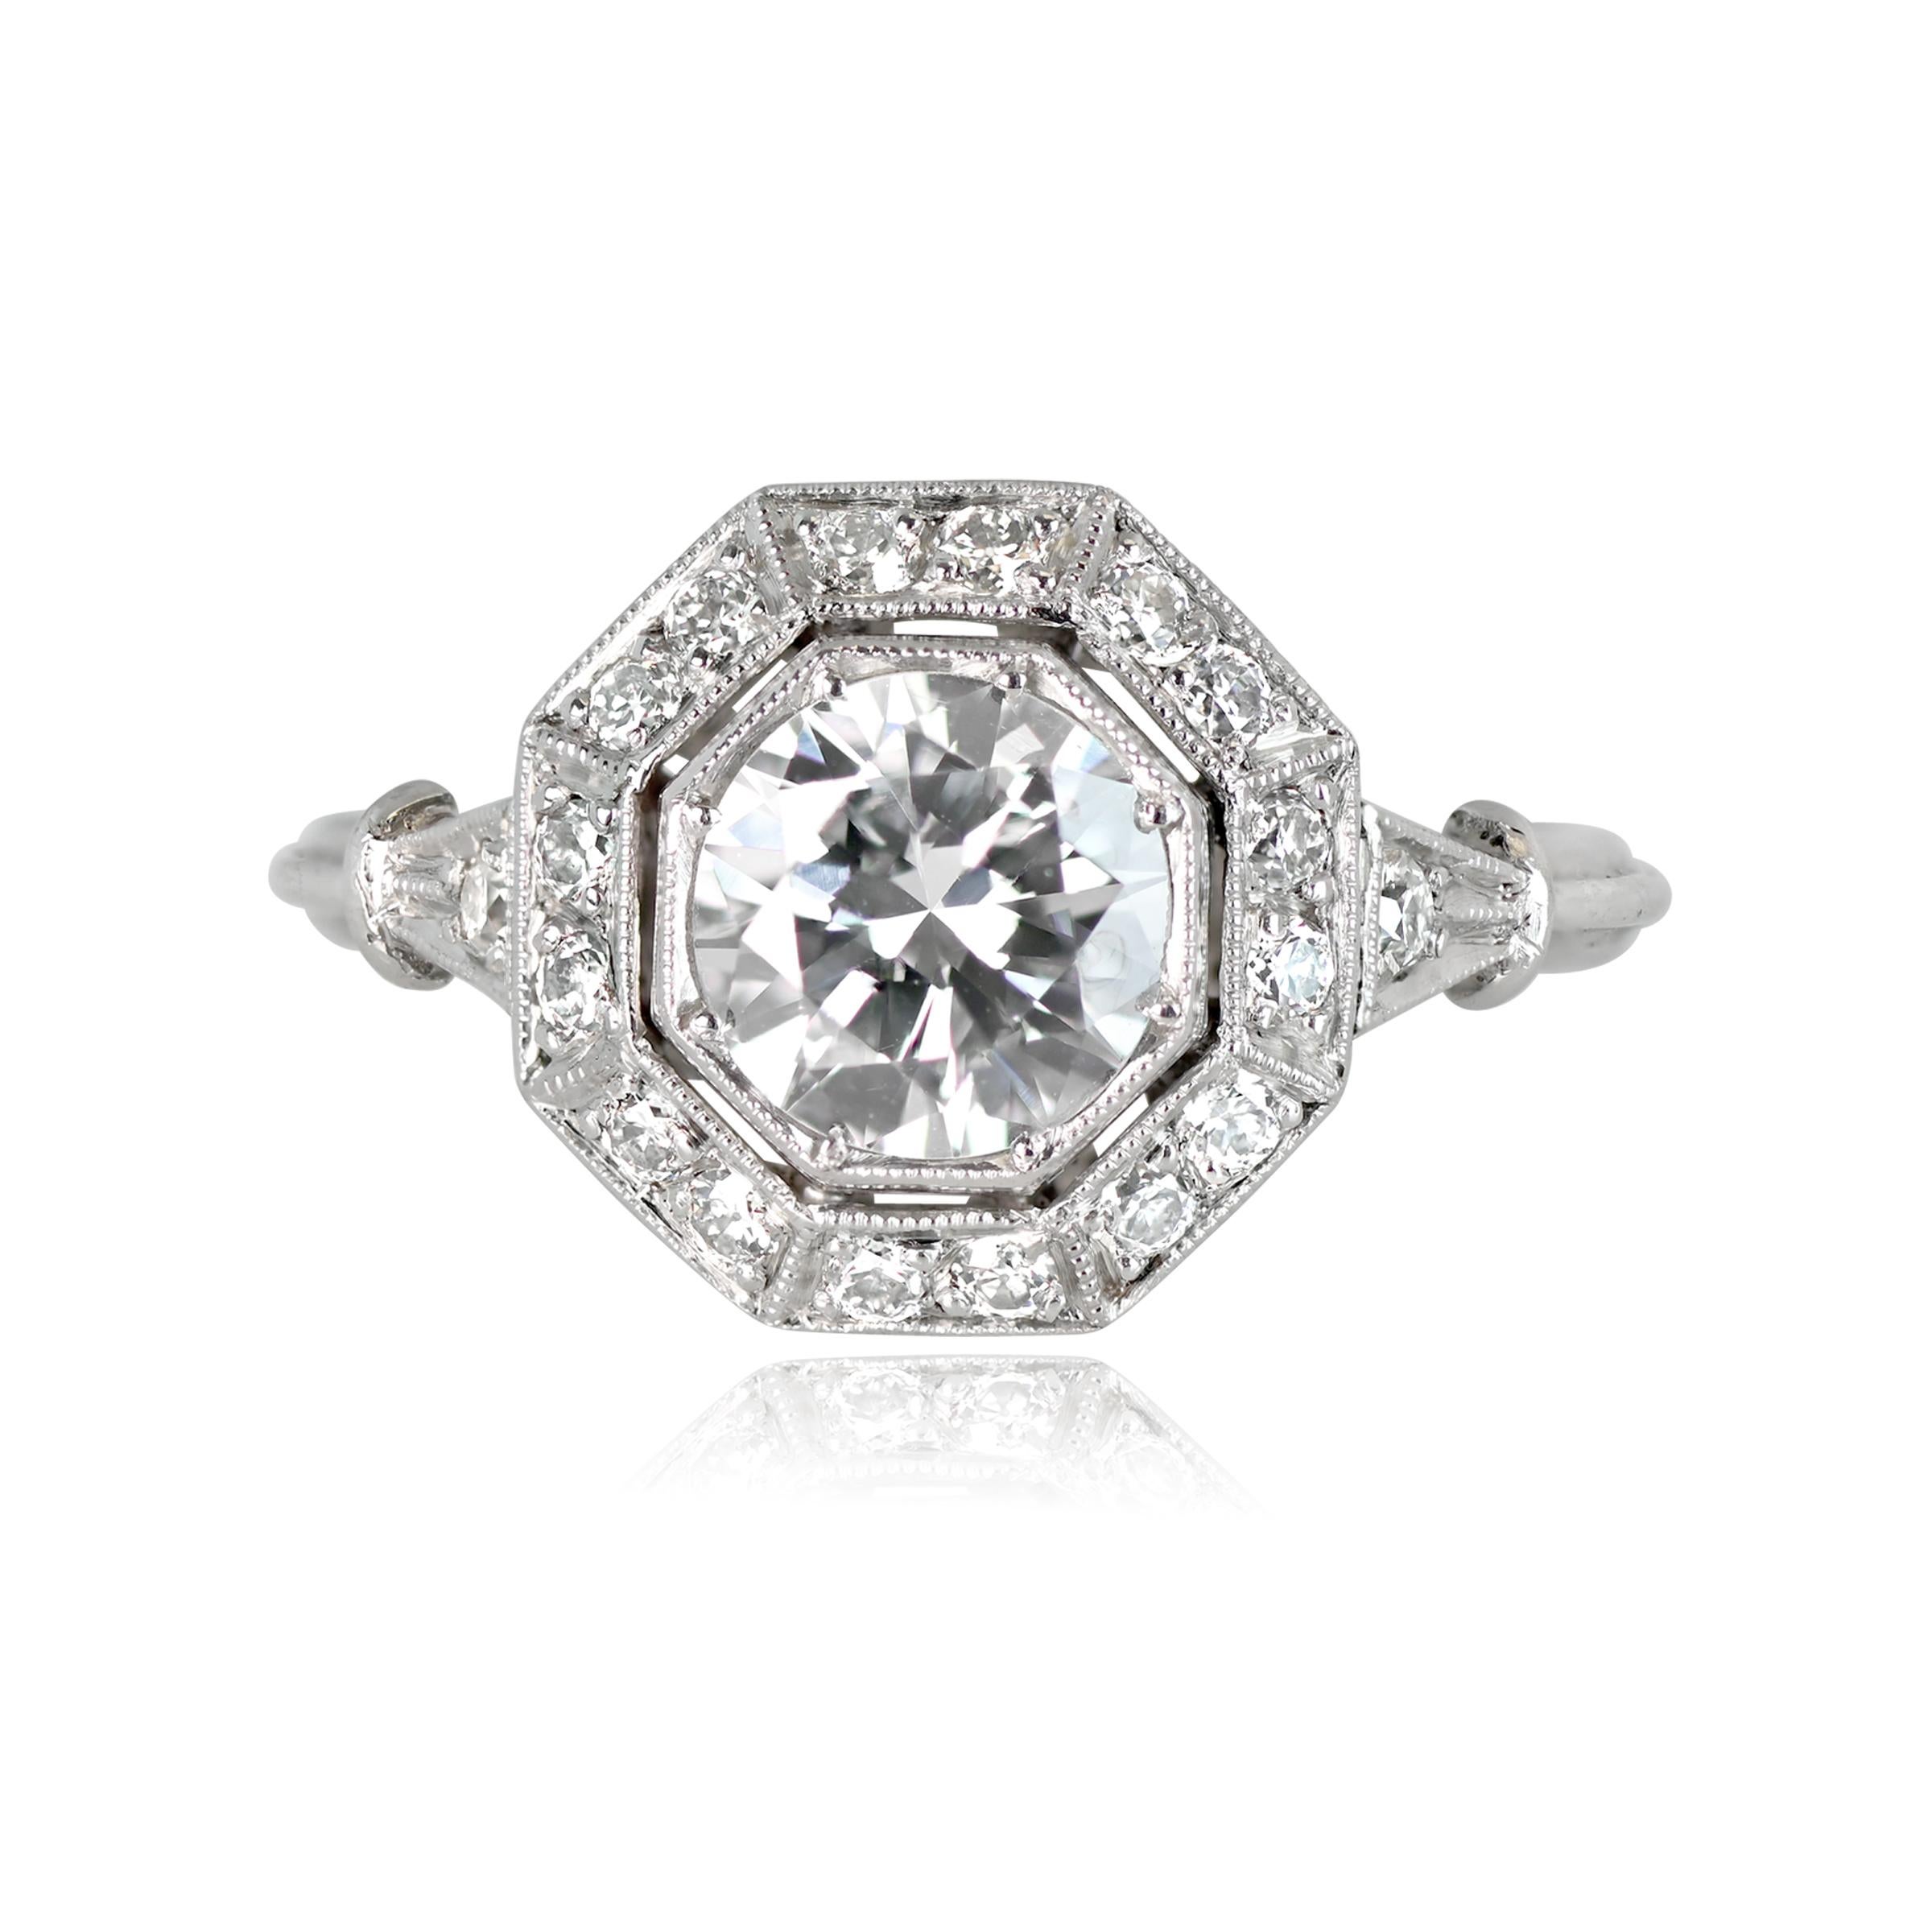 Introducing a stunning geometric diamond engagement ring, showcasing a vibrant 1.00 carat old European cut diamond (H color, SI1 clarity) at the center, elegantly surrounded by an octagonal halo of old European cut diamonds. The ring also features a